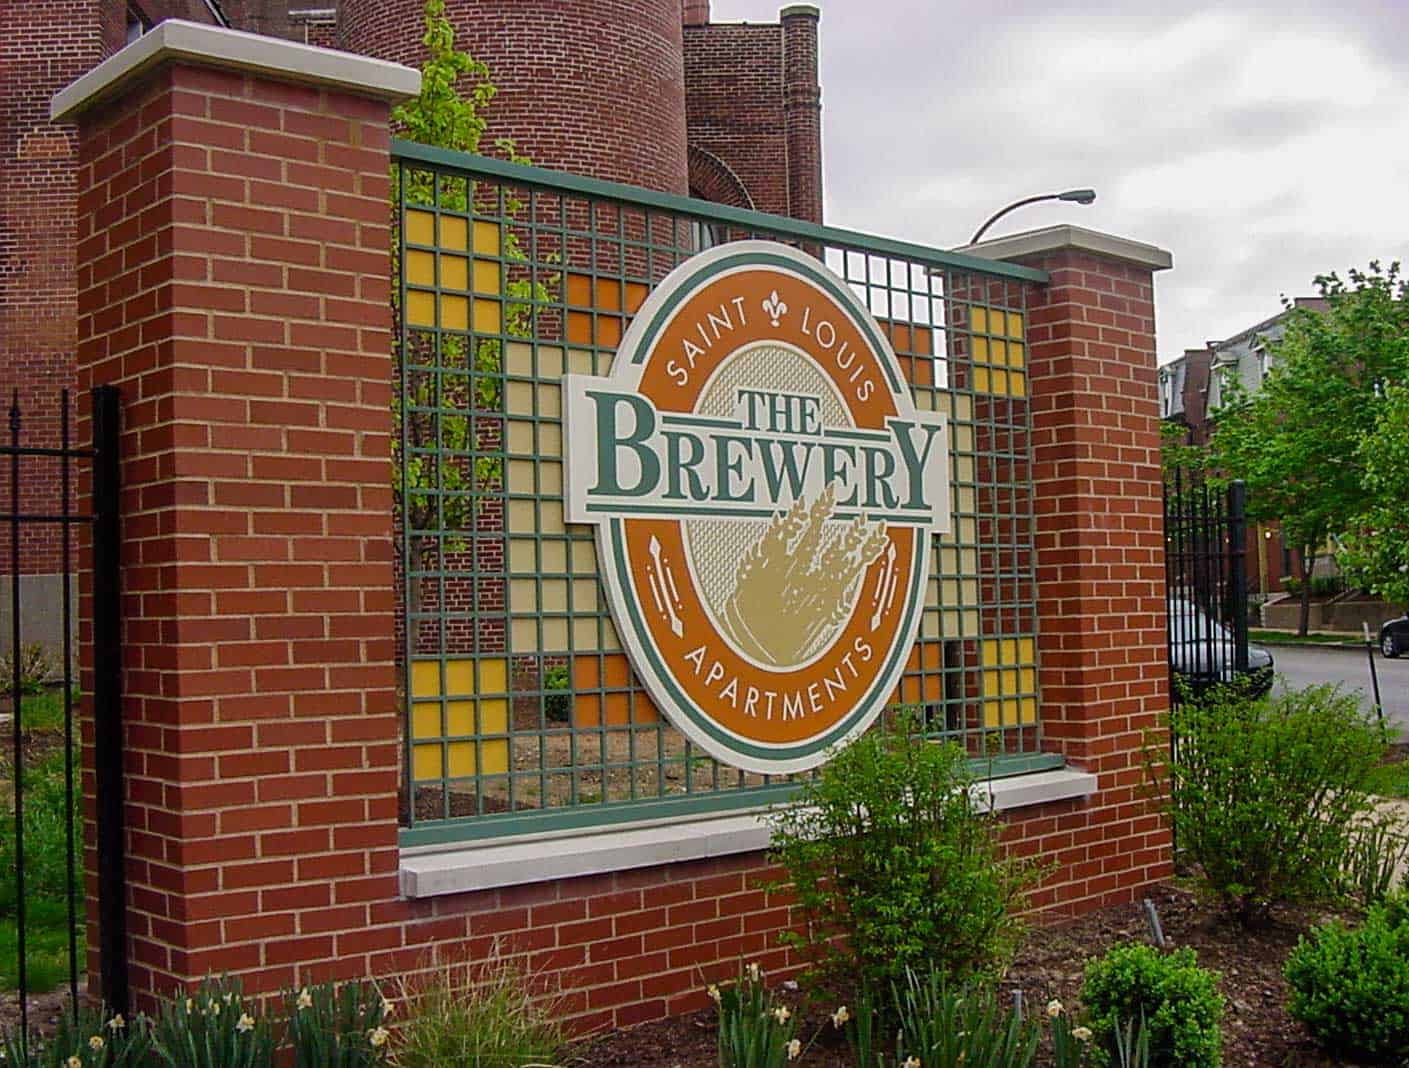 Custom monument sign for the Brewery featuring brick and metal base with custom dimensional logo